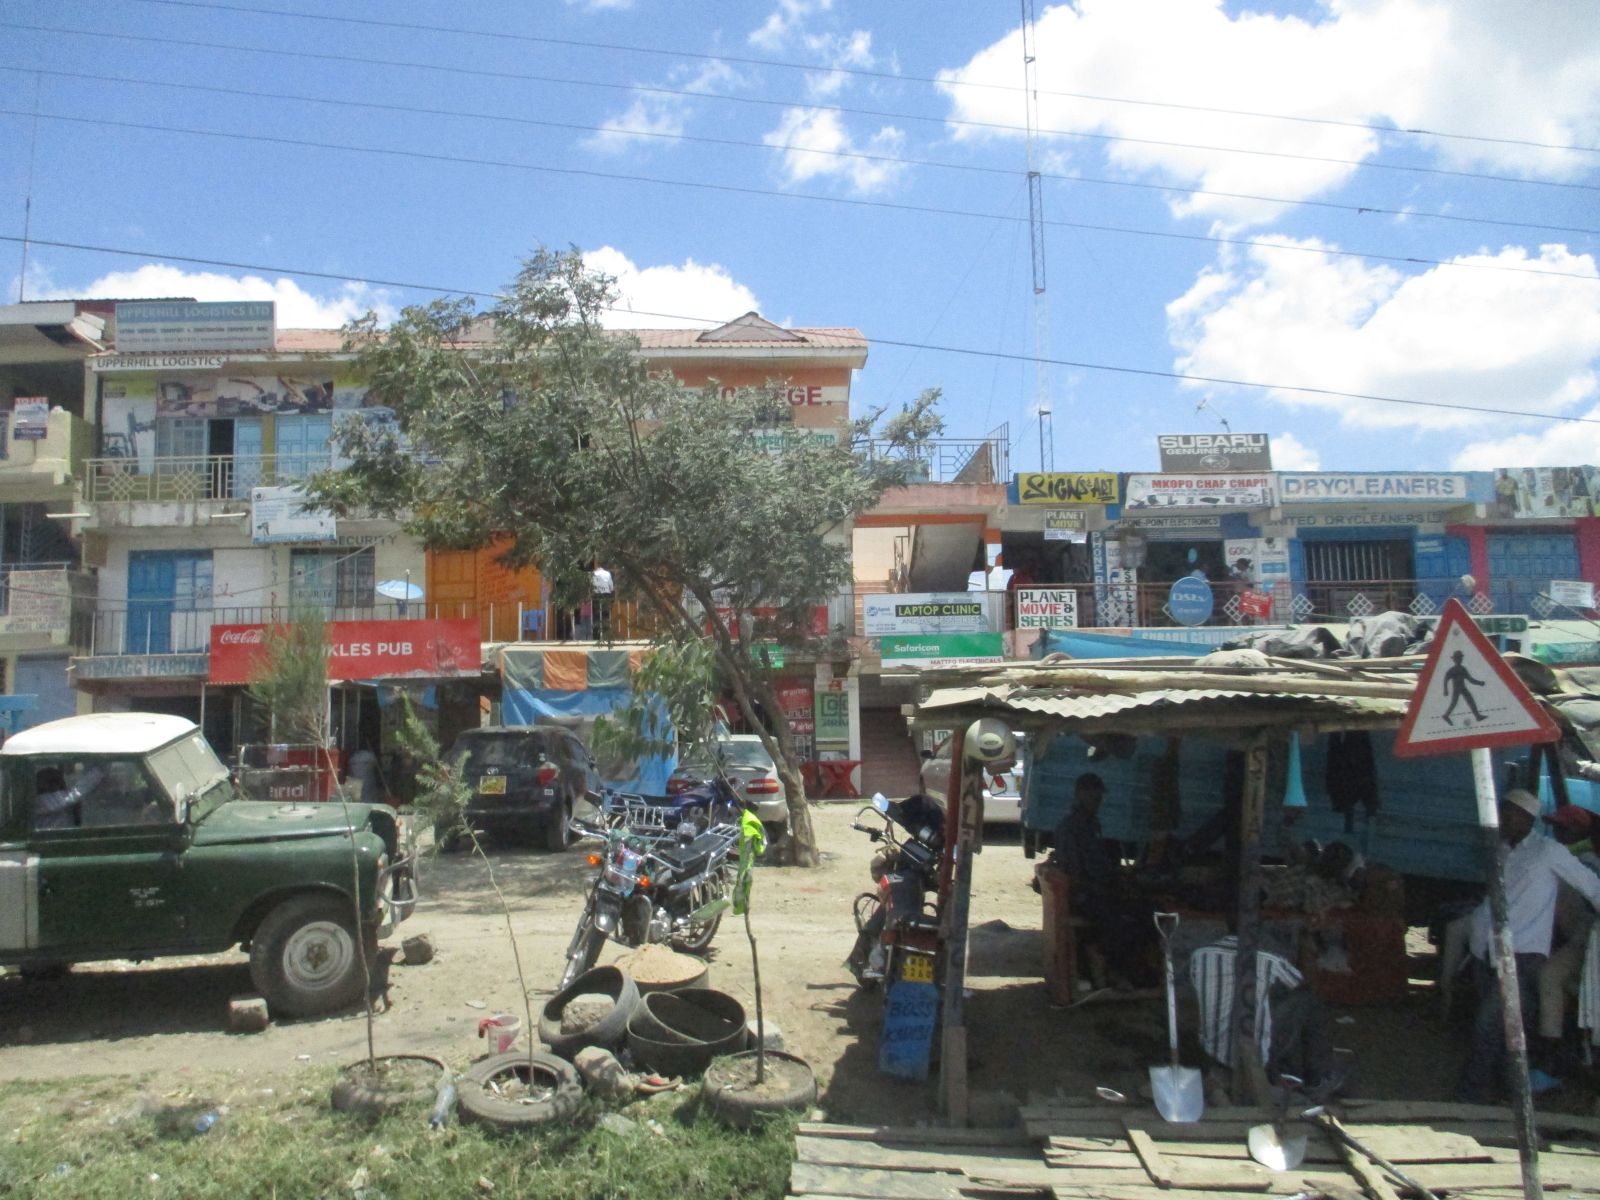 Growth in itself will not solve urban infrastructure problems: small shops on the outskirts of Nairobi.